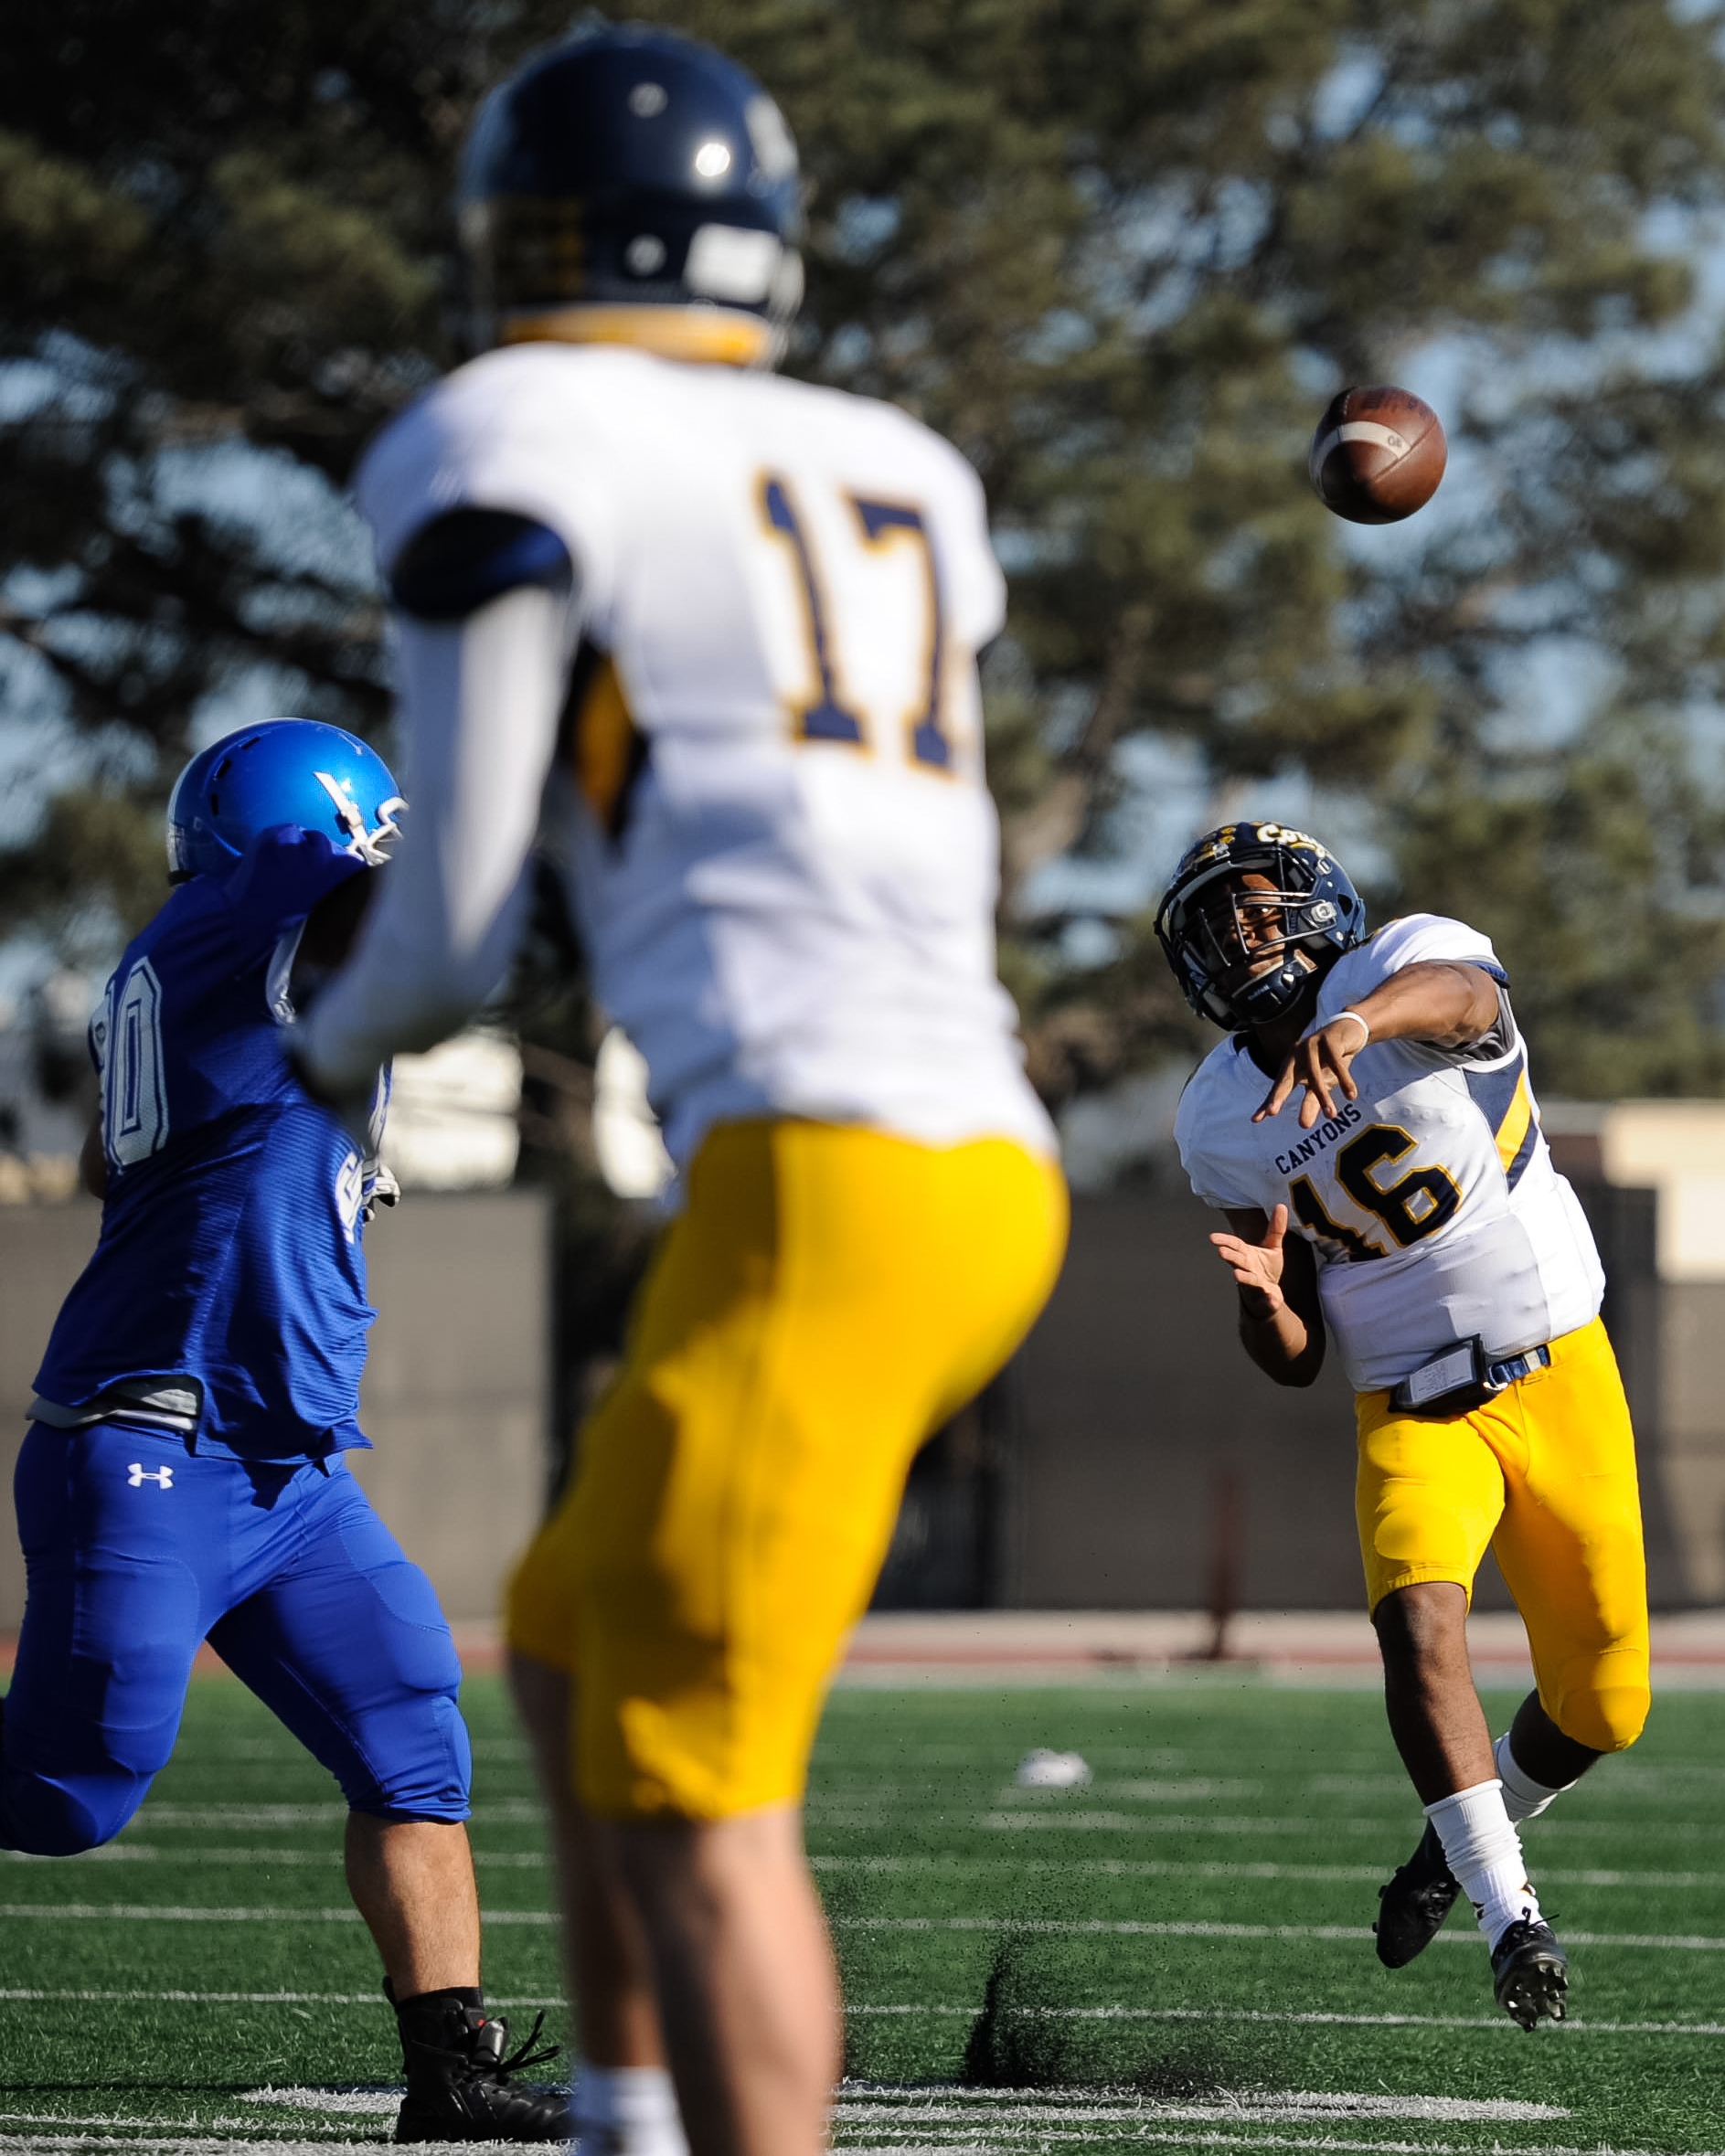  Quarterback Darryn Blackshere (16) of College of the Canyons  passes to wide receiver Hunter Schuessler (17). The Santa Monica College Corsairs lose their final home game 7-48 to the College of the Canyons Cougars and will play their final game of t